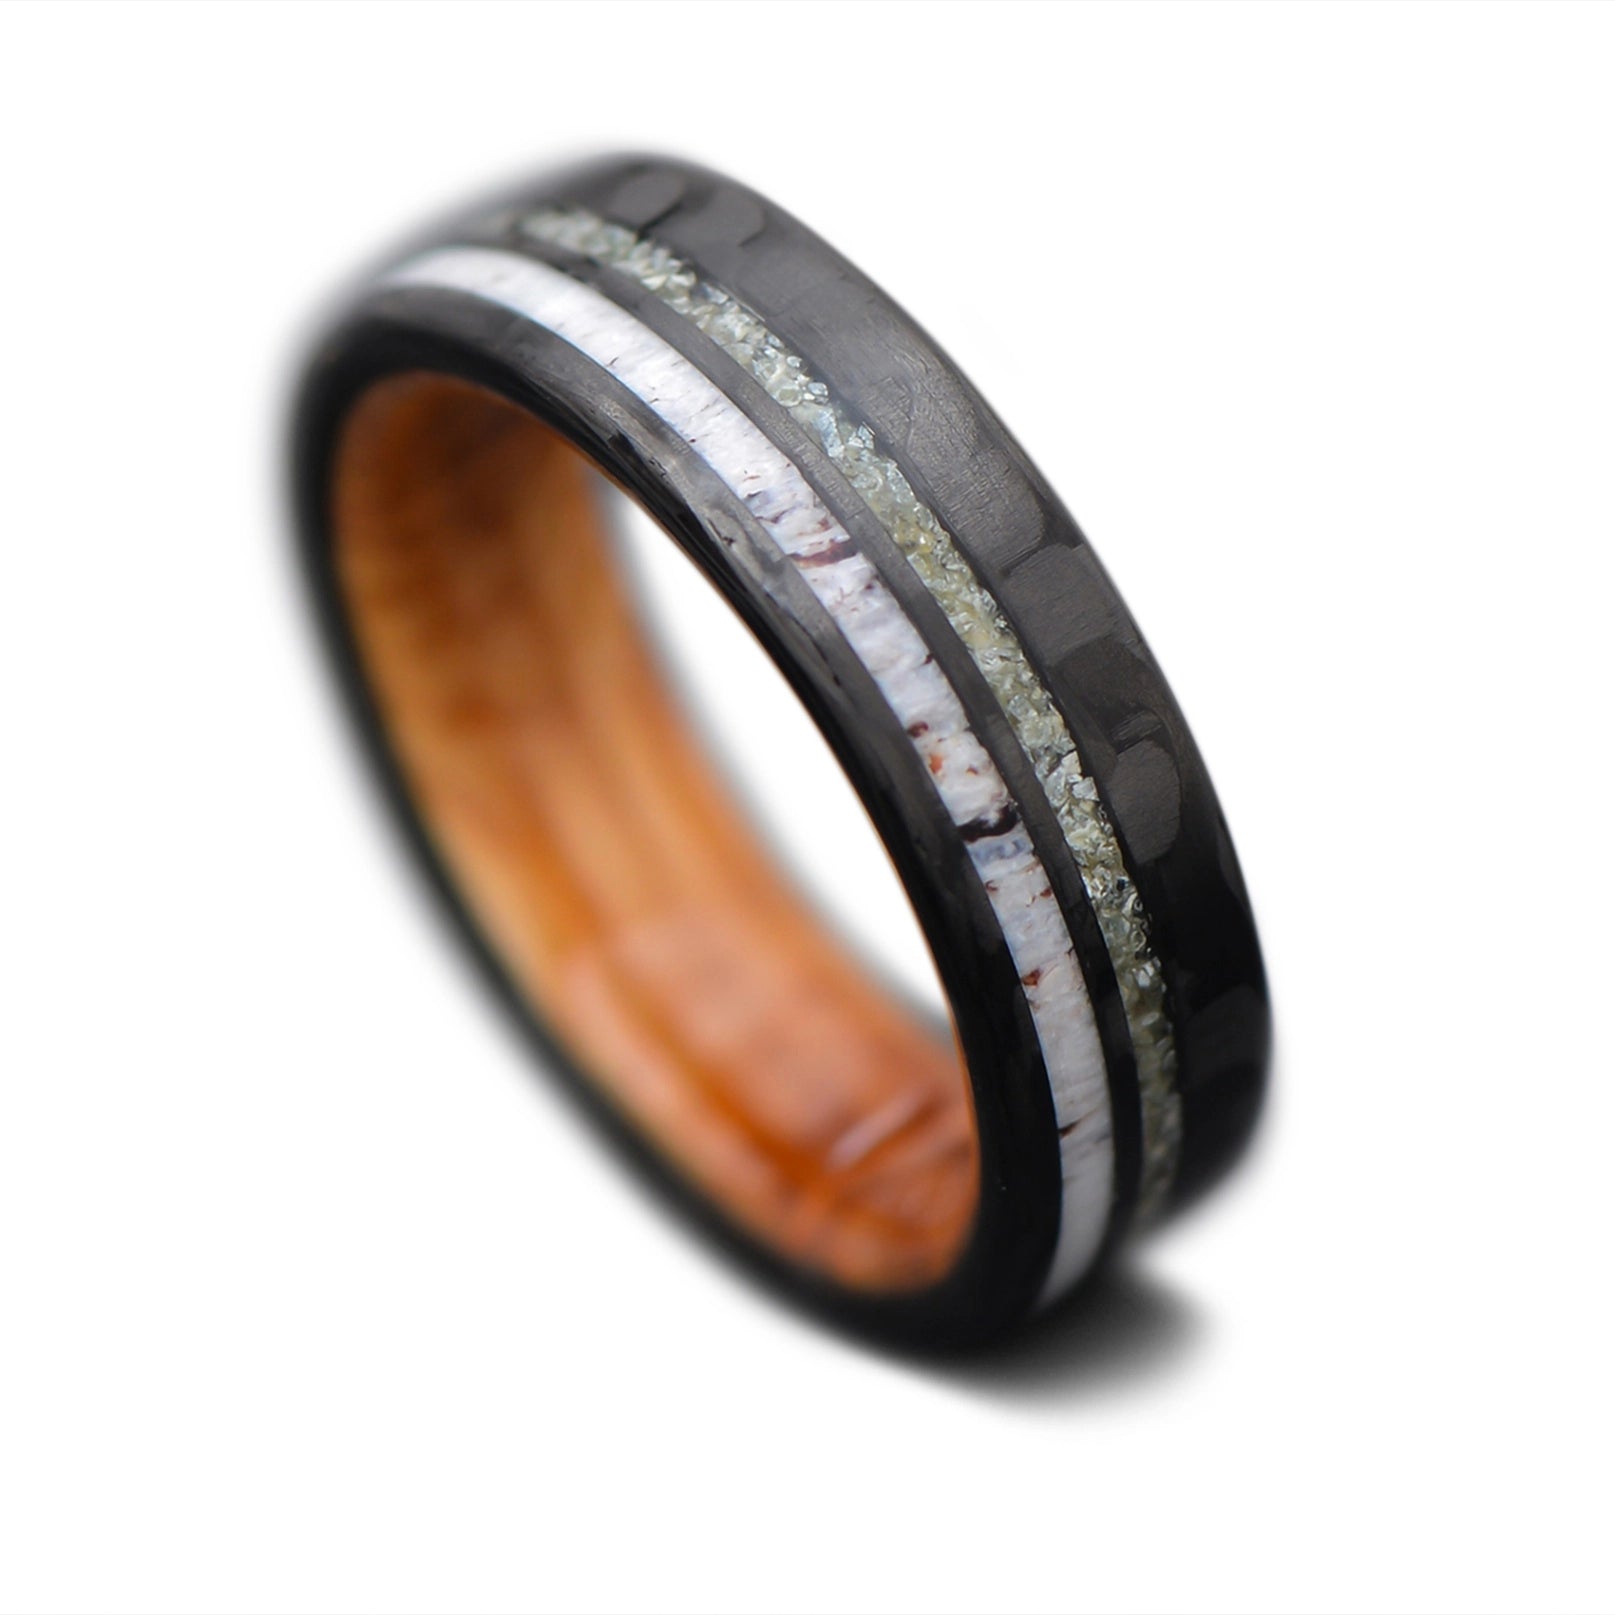 CarbonTwill Core Ring with Deer Antler, Jade inlay and  Whiskey Barrel Oak inner sleeve, 6mm -THE SEEKER